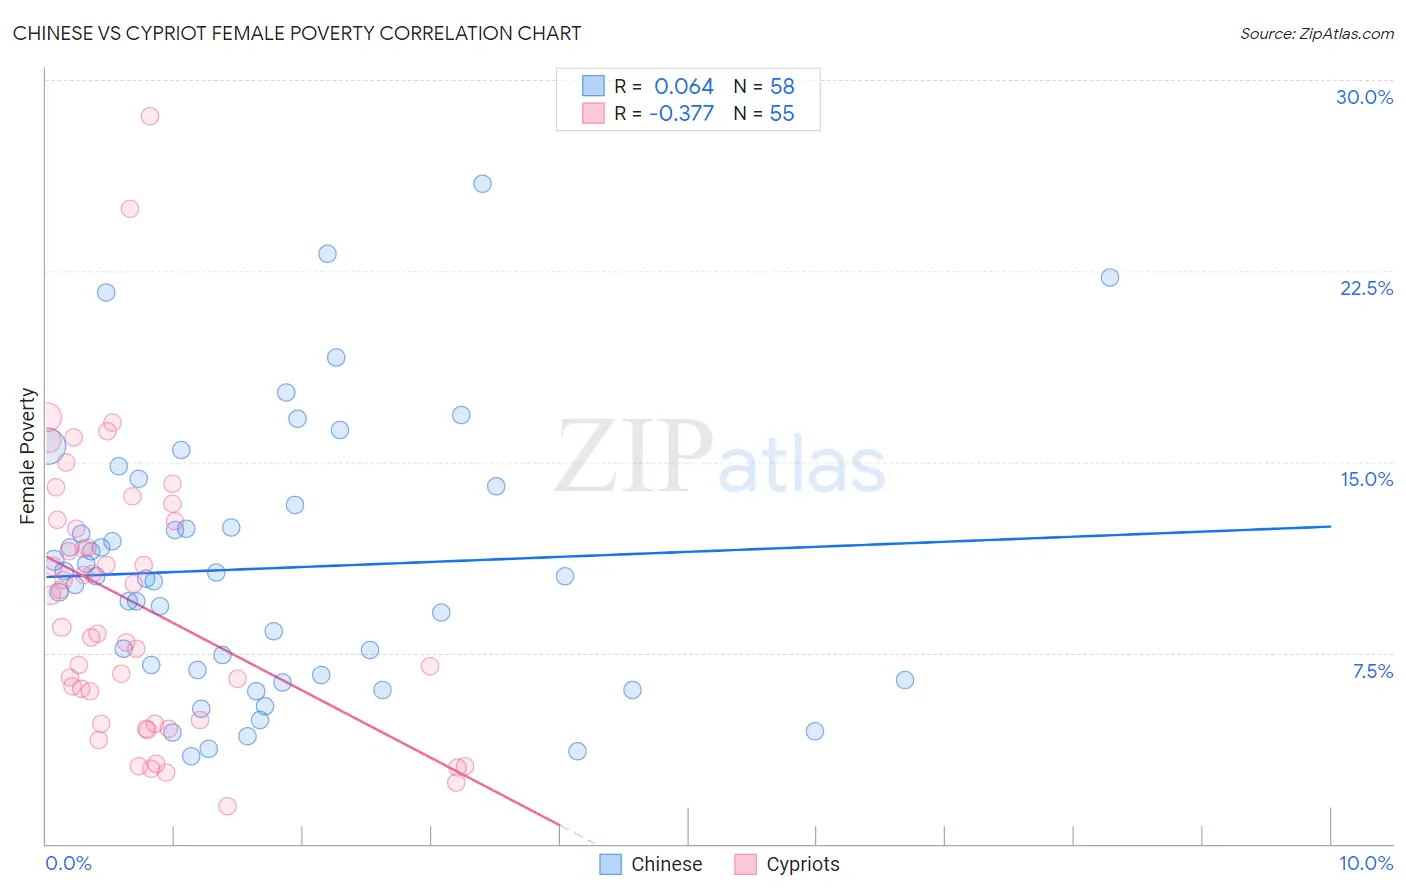 Chinese vs Cypriot Female Poverty